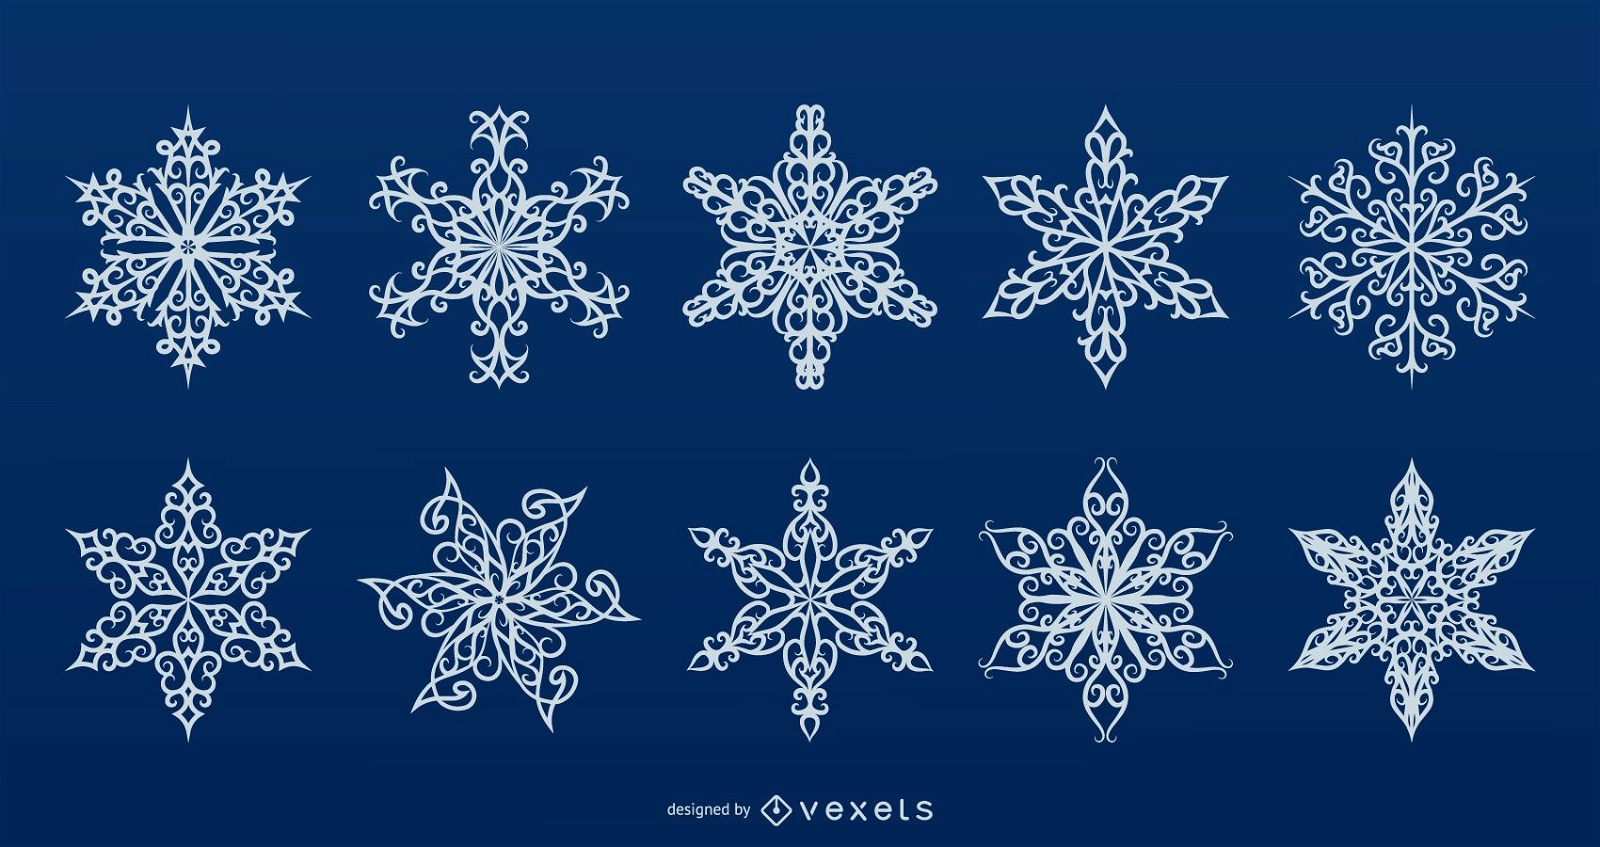 Detailed snowflakes vector collection